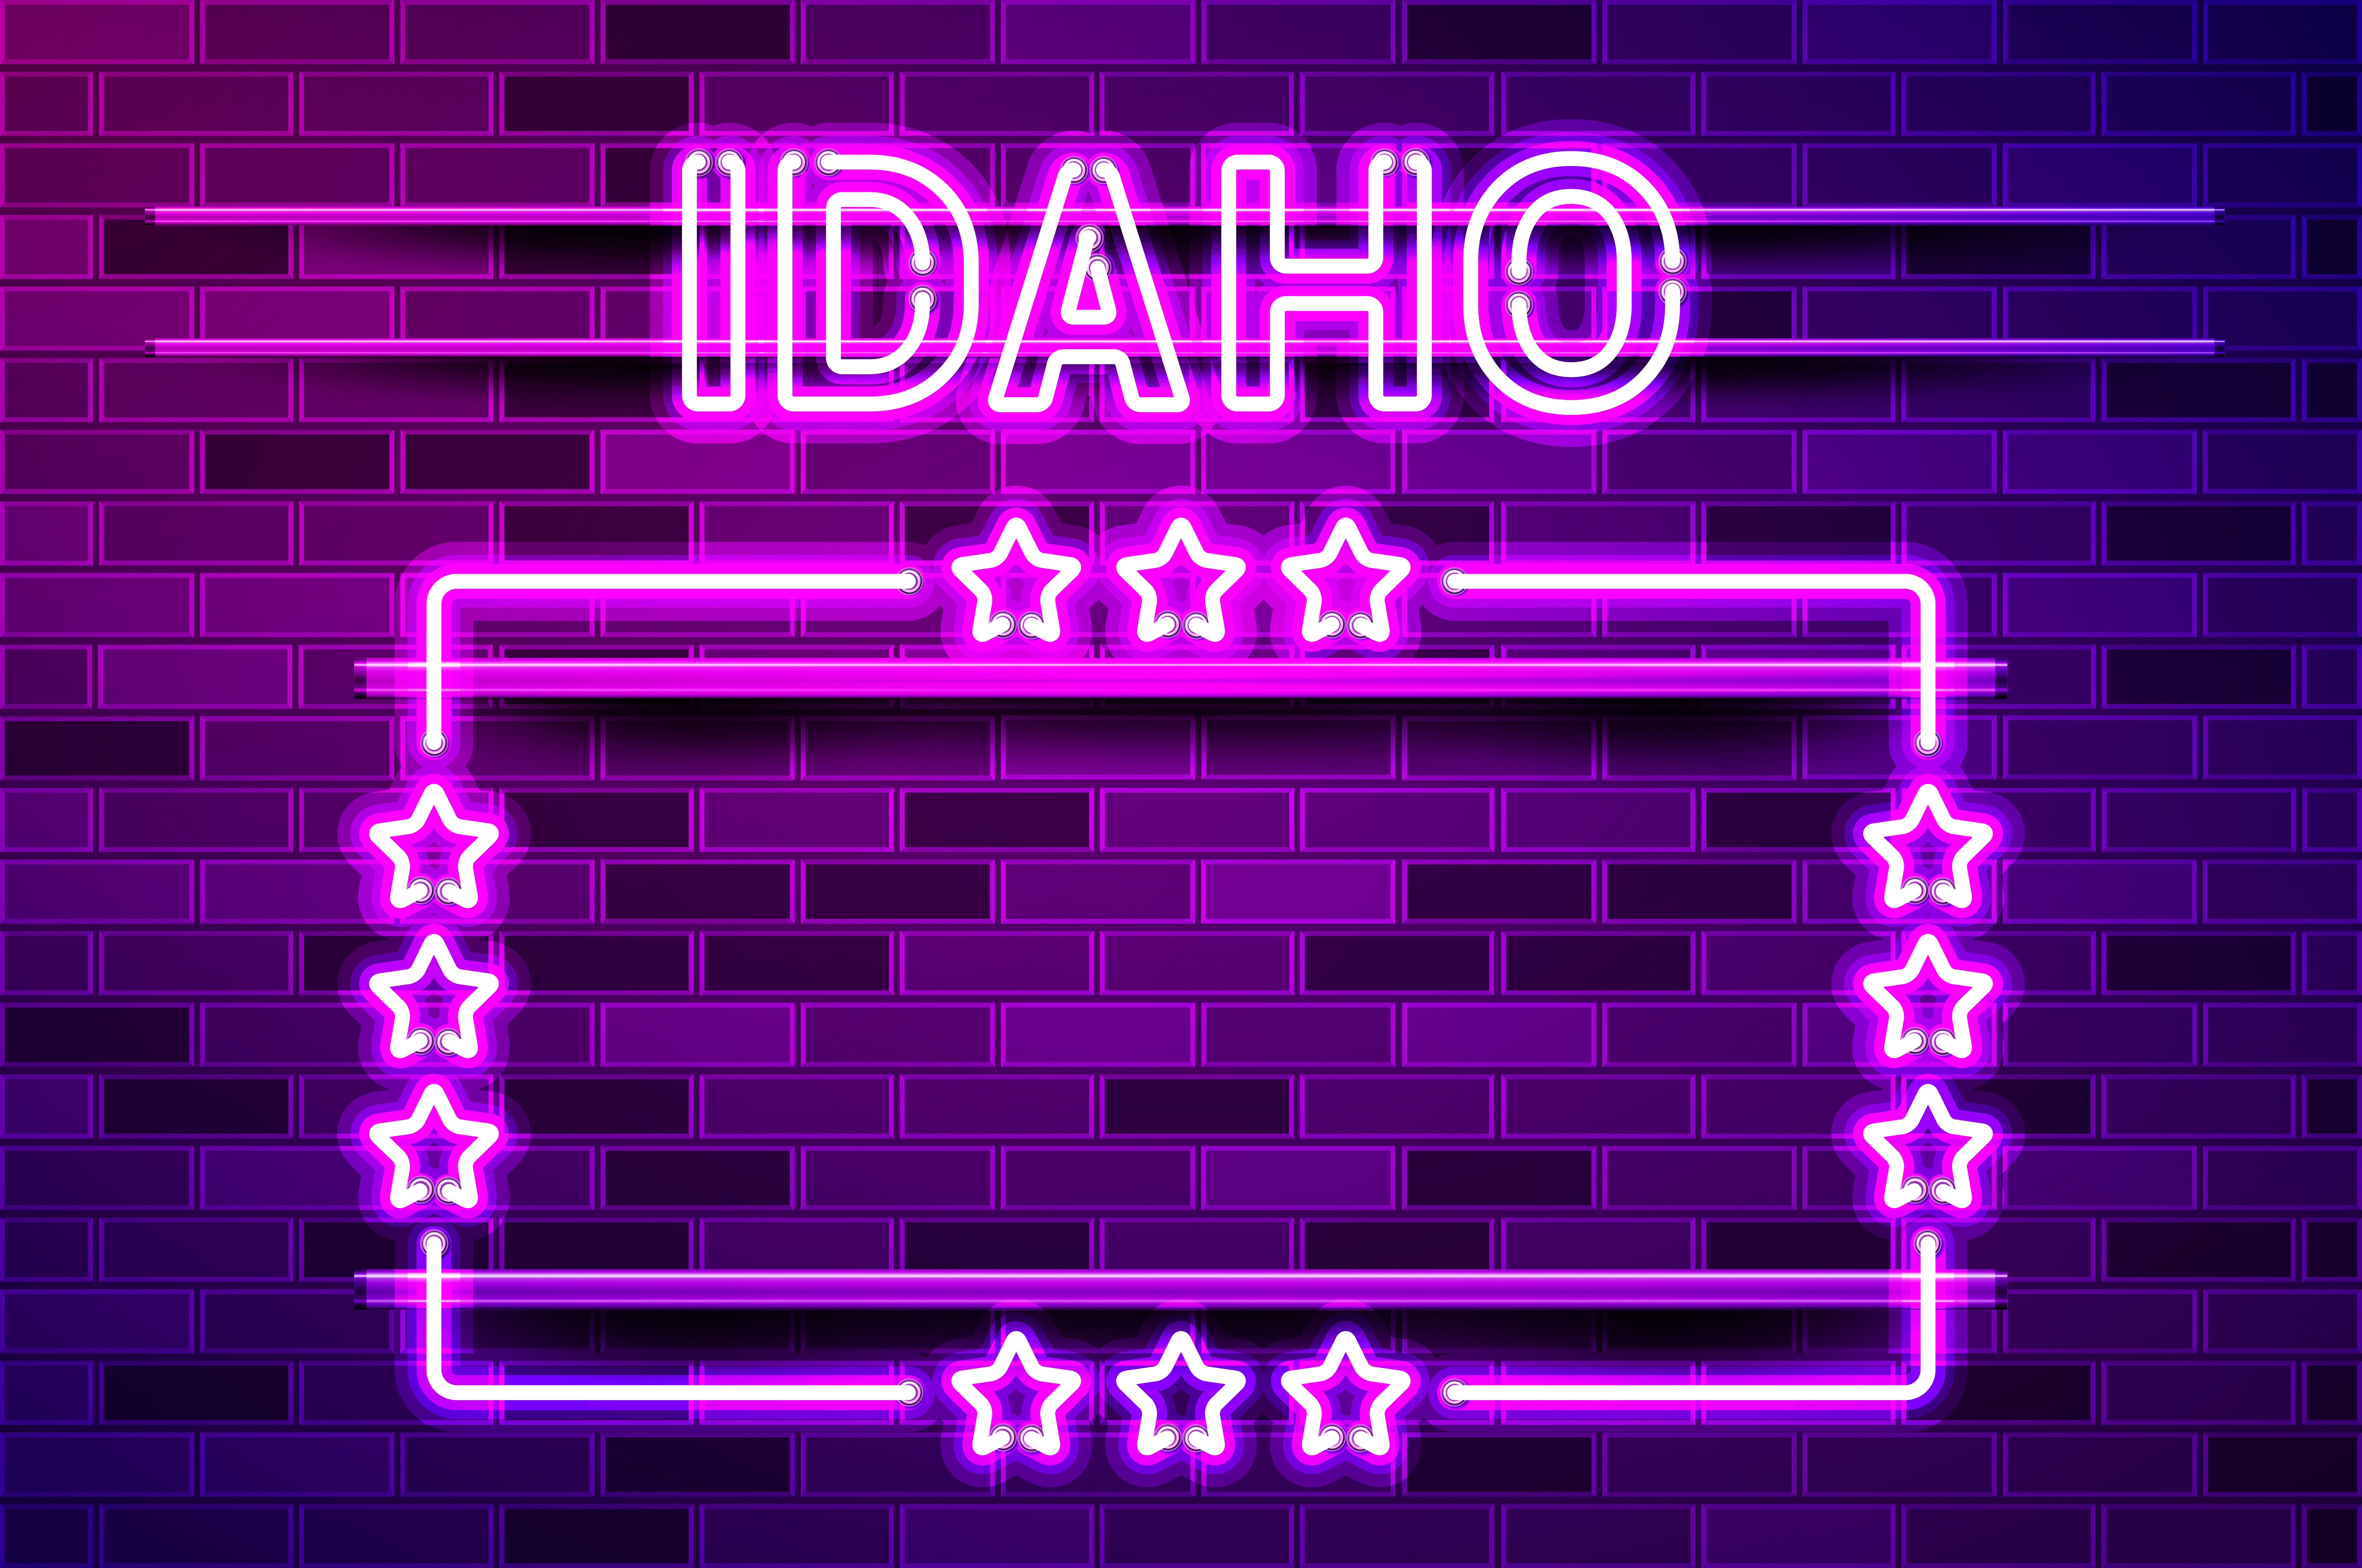 Idaho US State glowing purple neon lettering and a rectangular frame with stars. Realistic vector illustration. Purple brick wall, violet glow, metal holders.. Idaho US State glowing purple neon lettering and a rectangular frame with stars